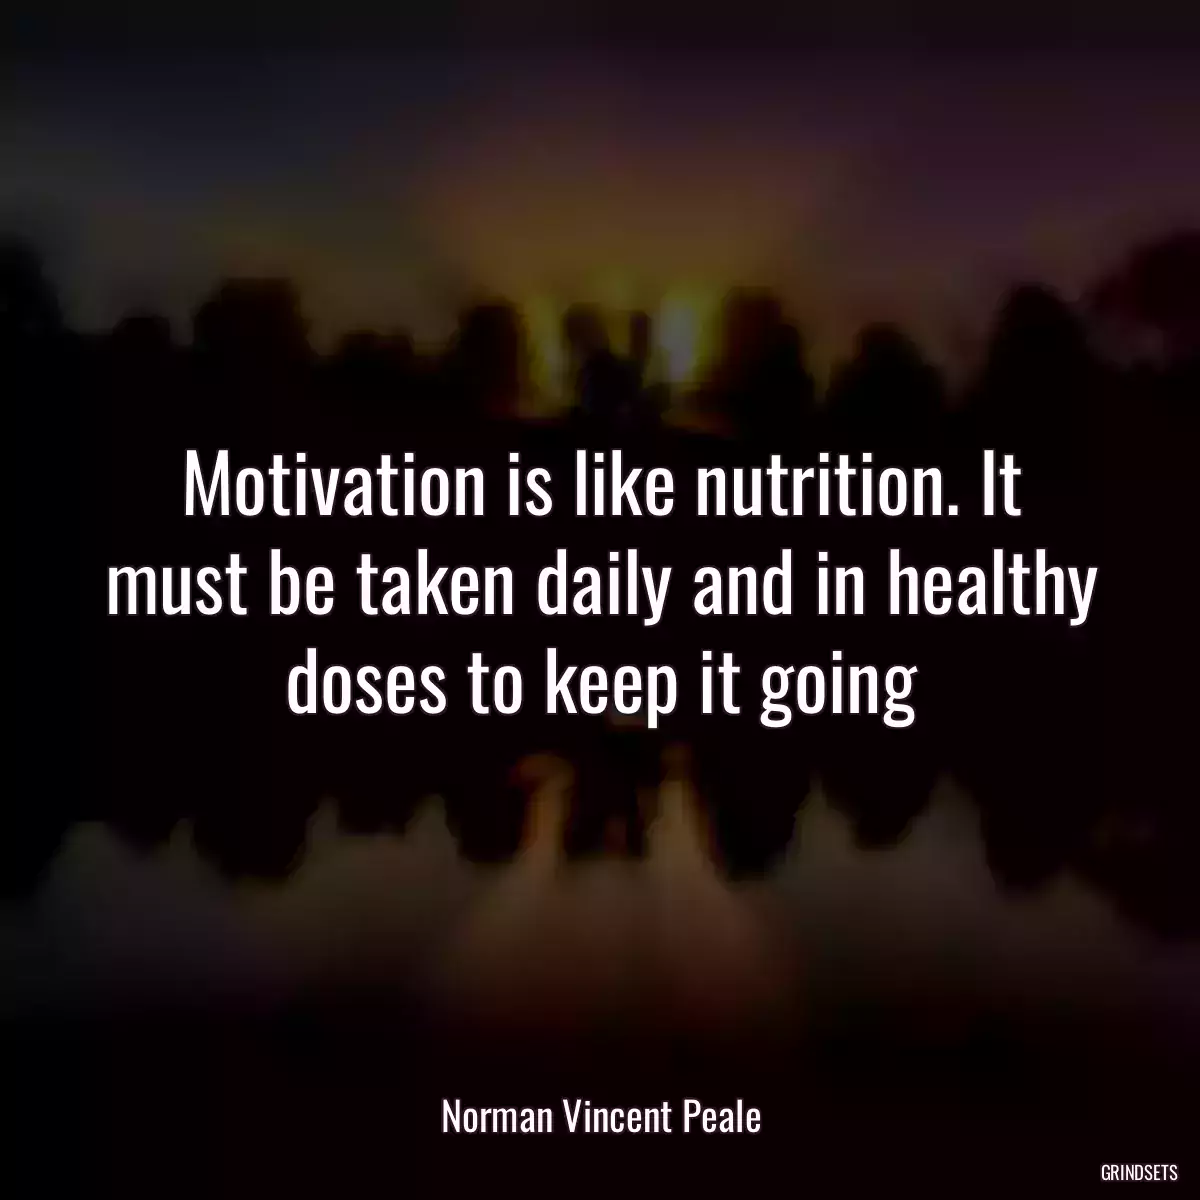 Motivation is like nutrition. It must be taken daily and in healthy doses to keep it going